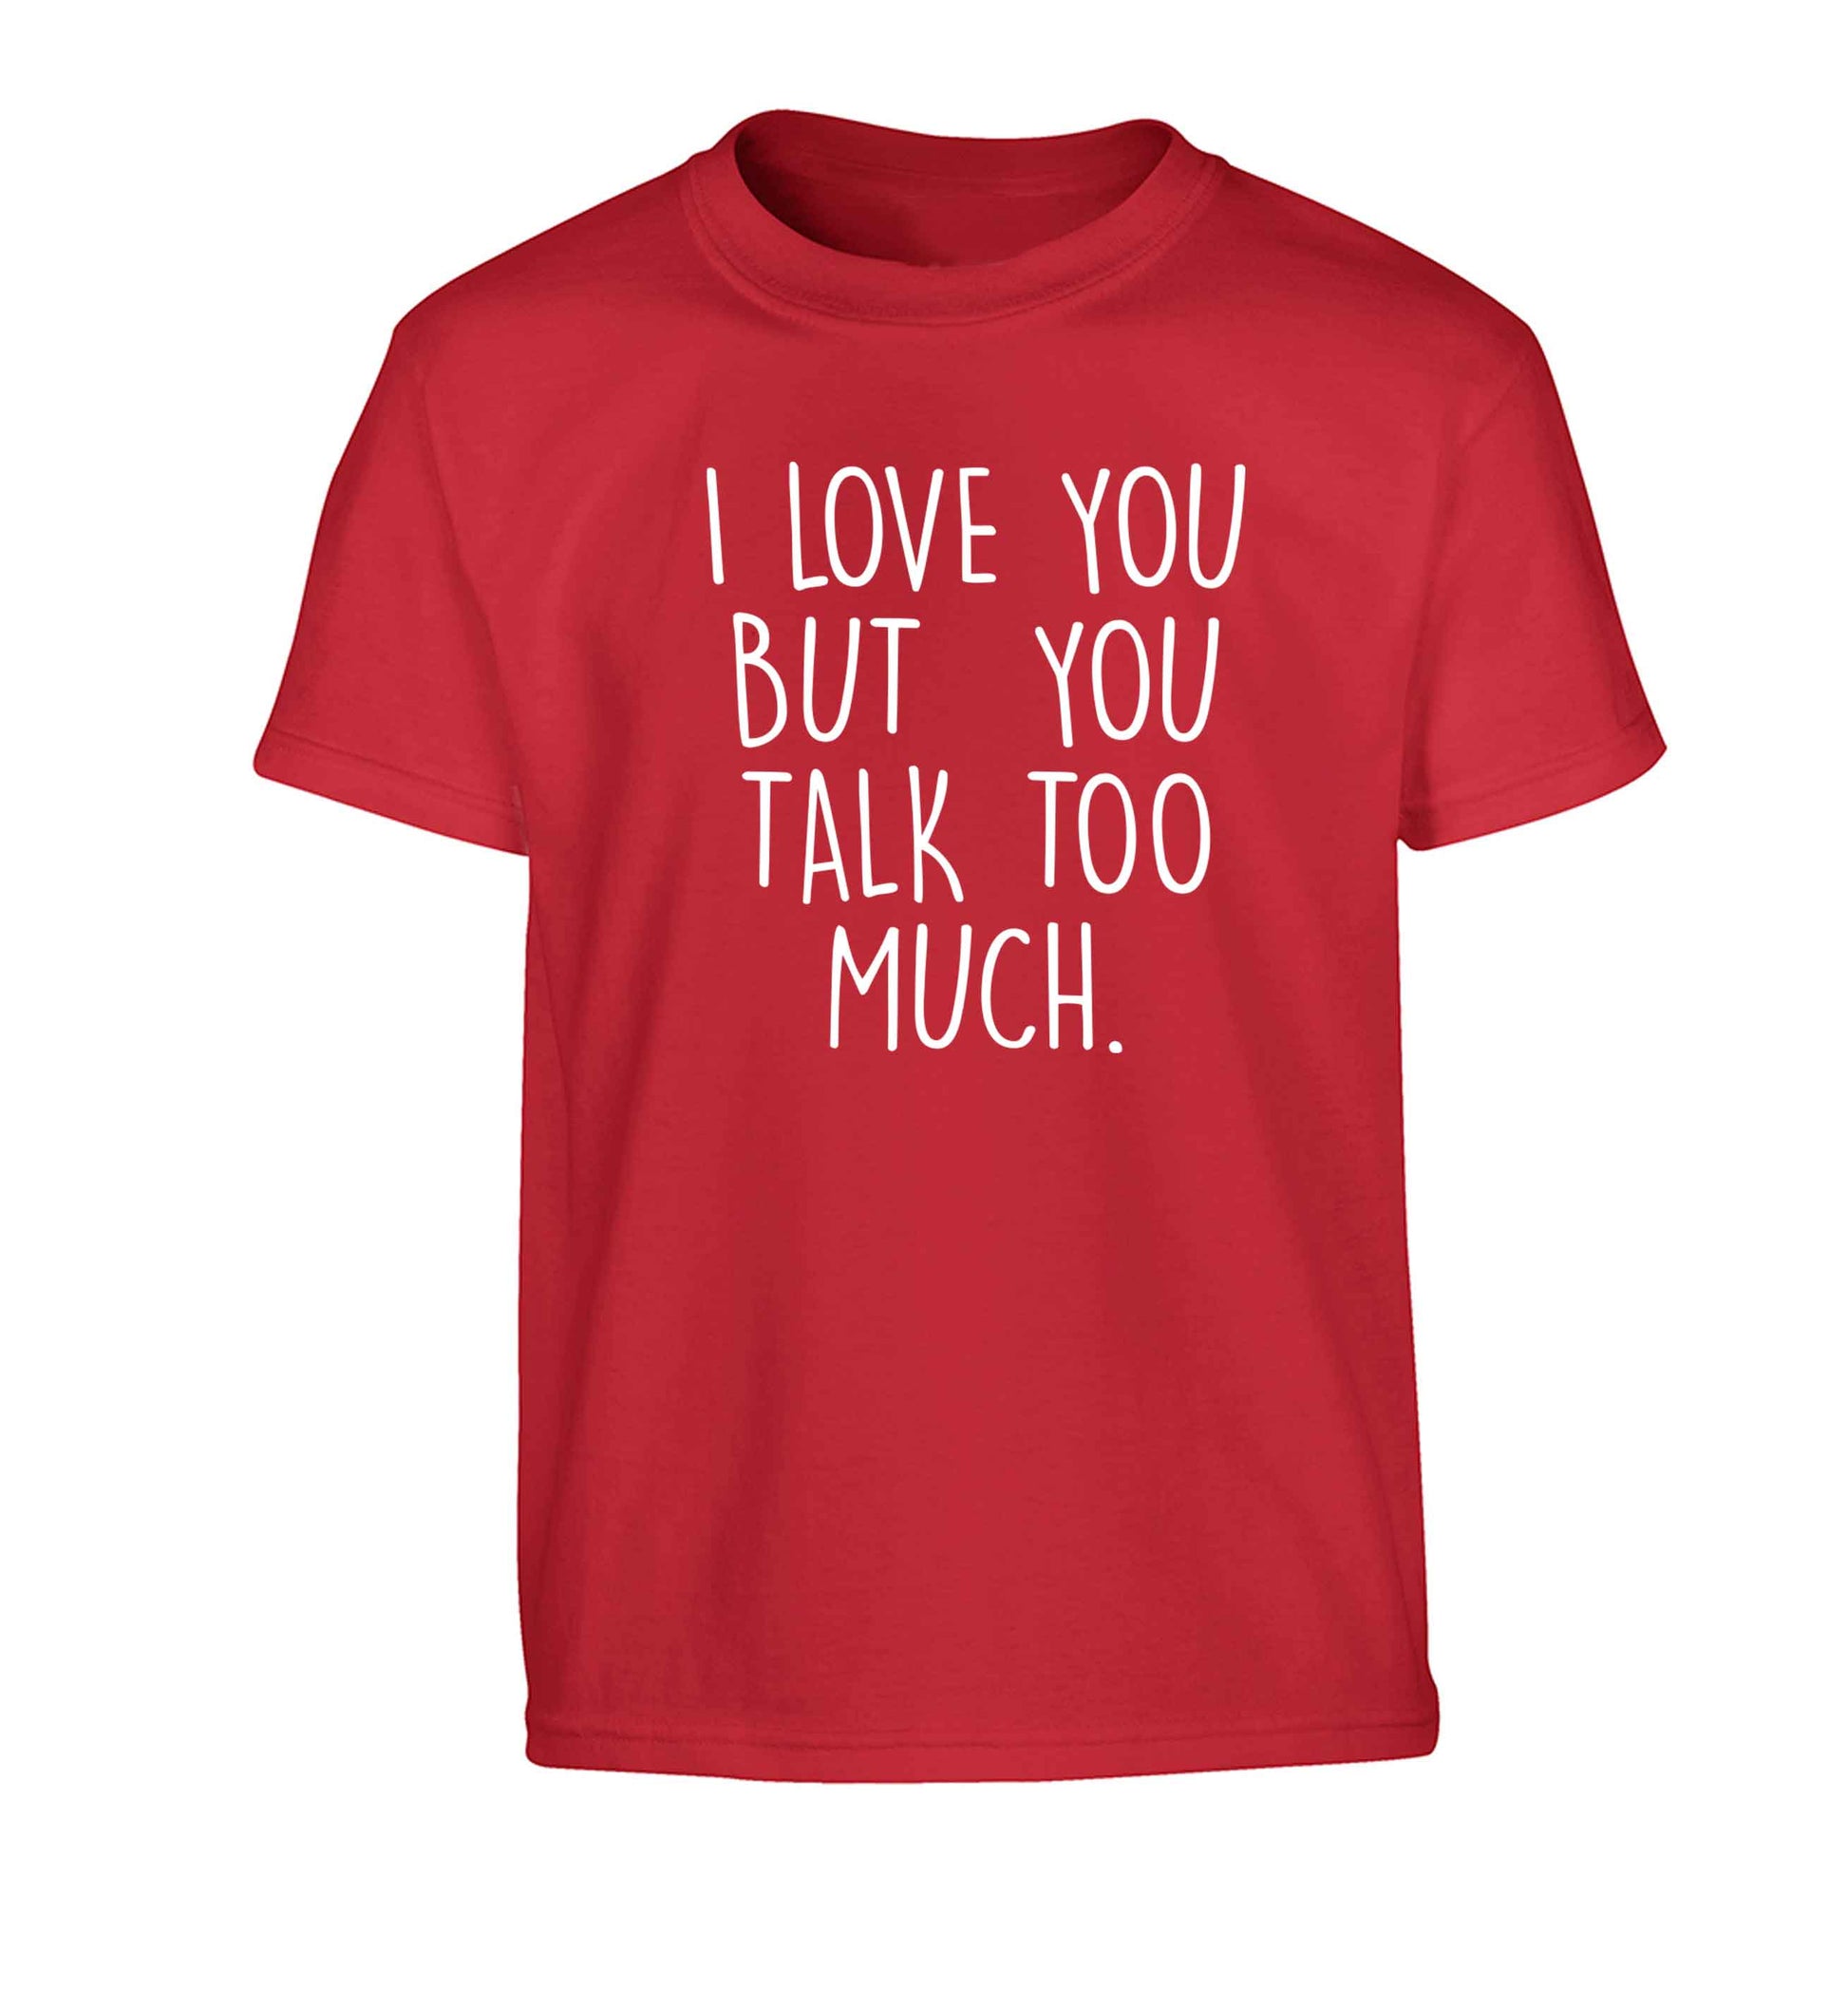 I love you but you talk too much Children's red Tshirt 12-13 Years